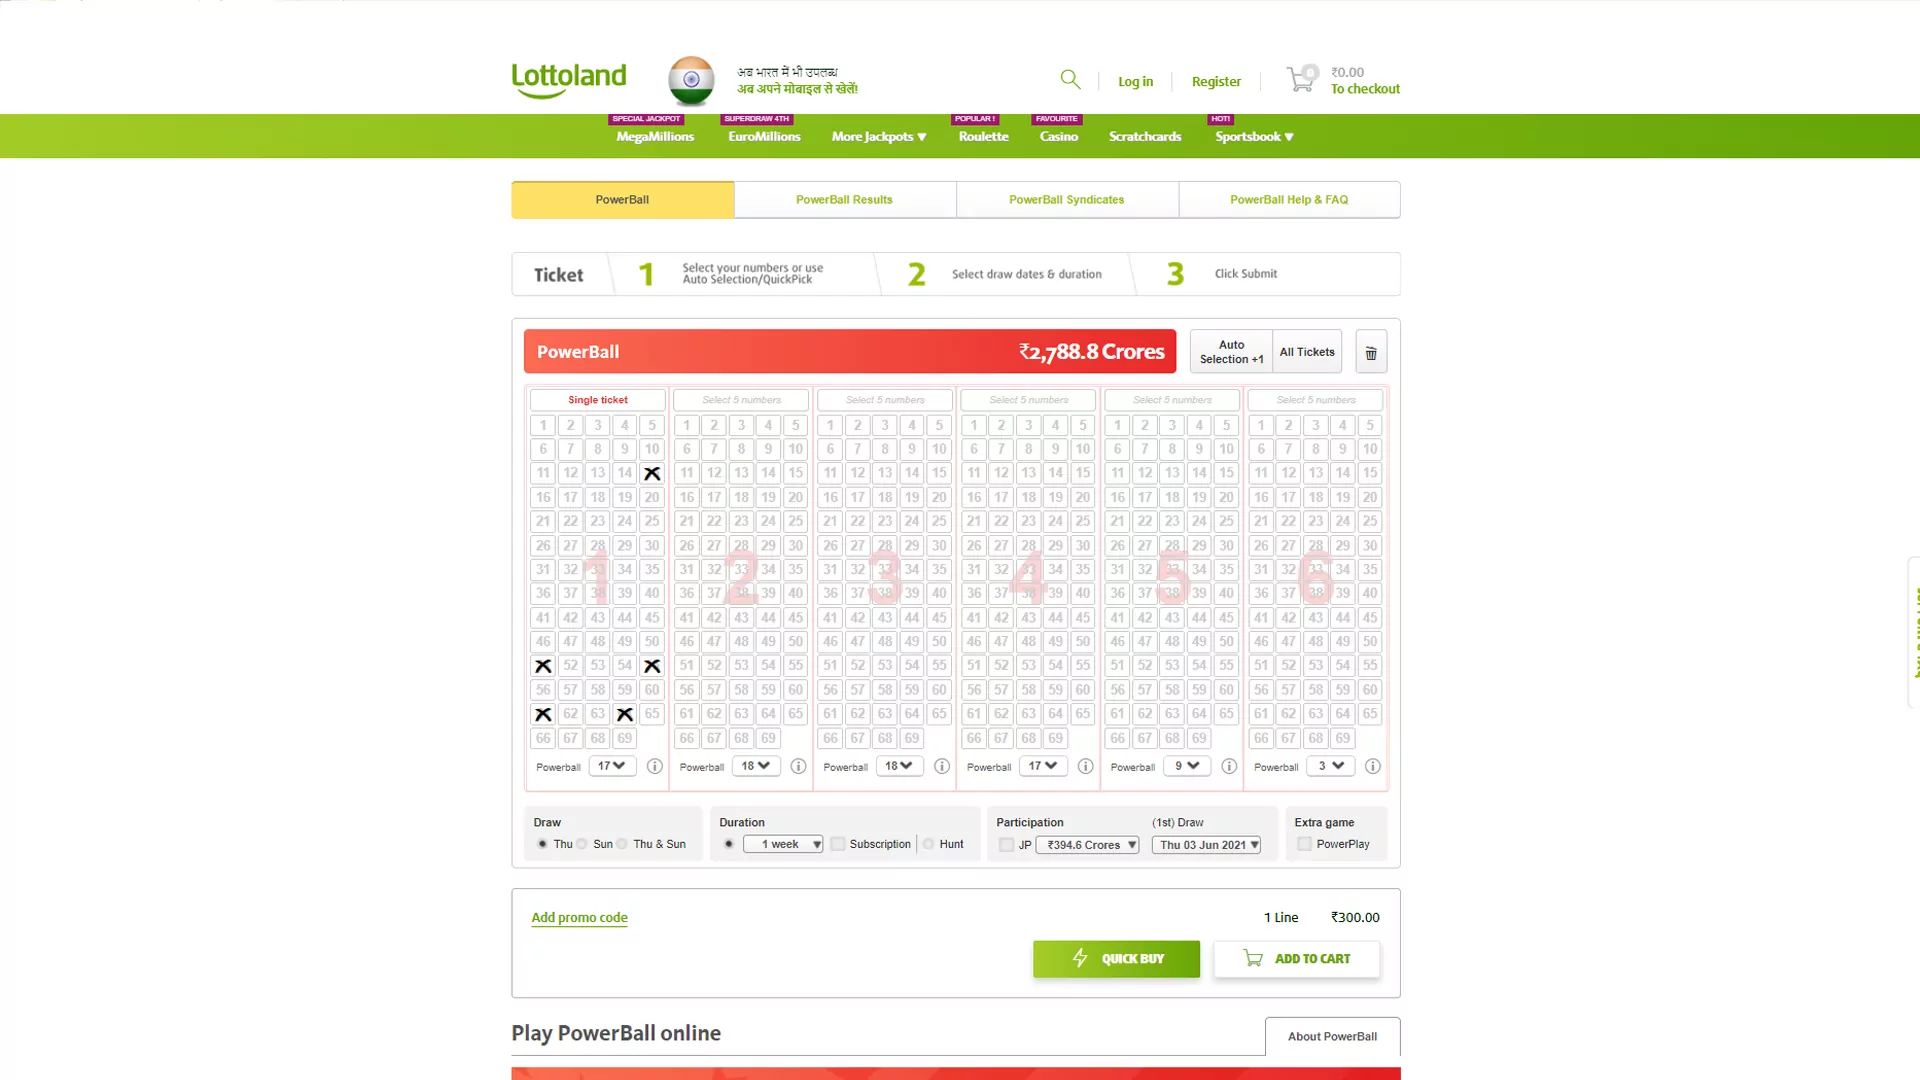 The PowerBall at LottoLand is one of the most popular lotteries on this site.